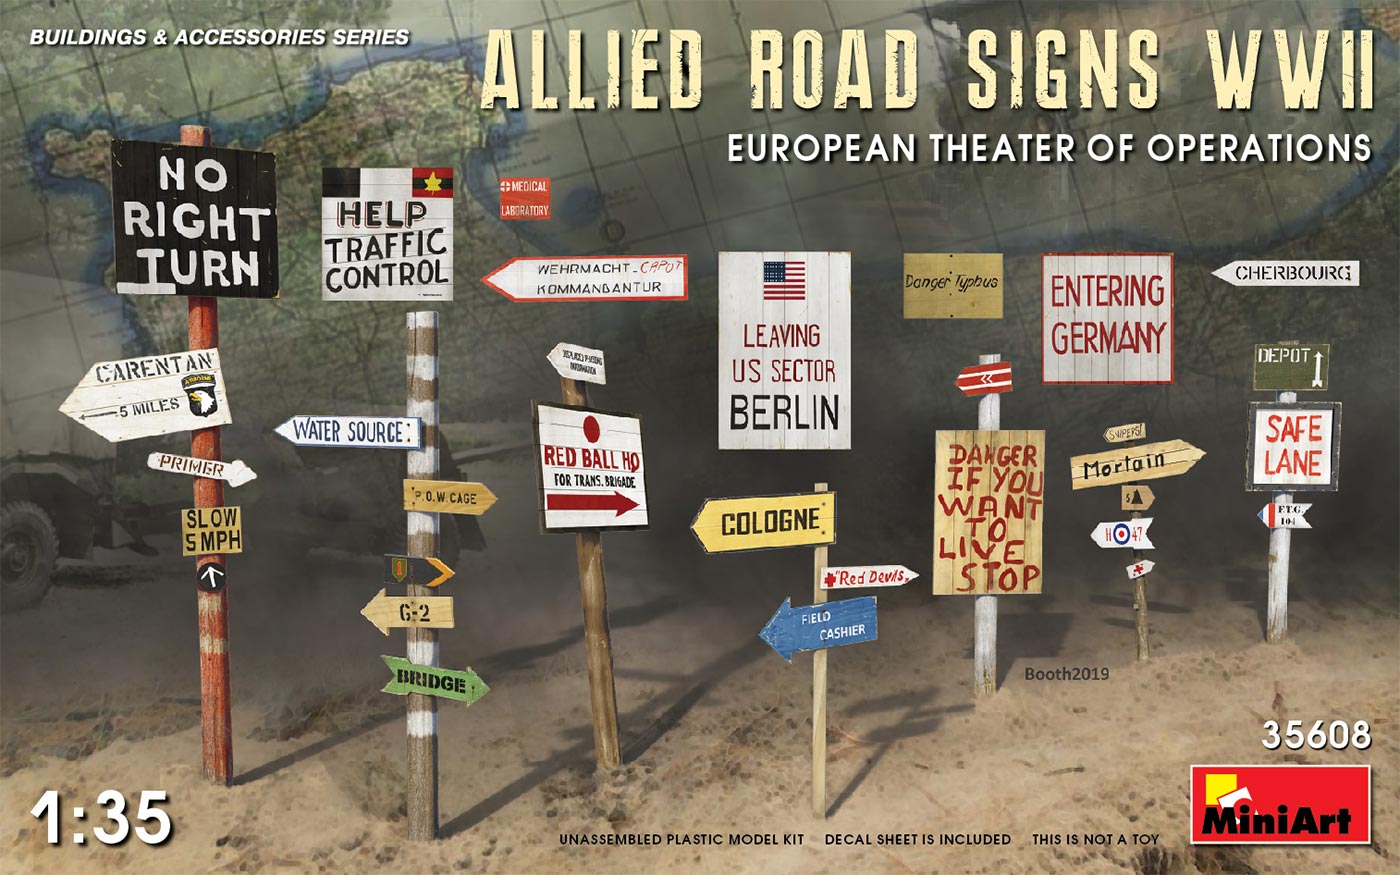 1/35 Allied Road Signs WWII (European Theatre)